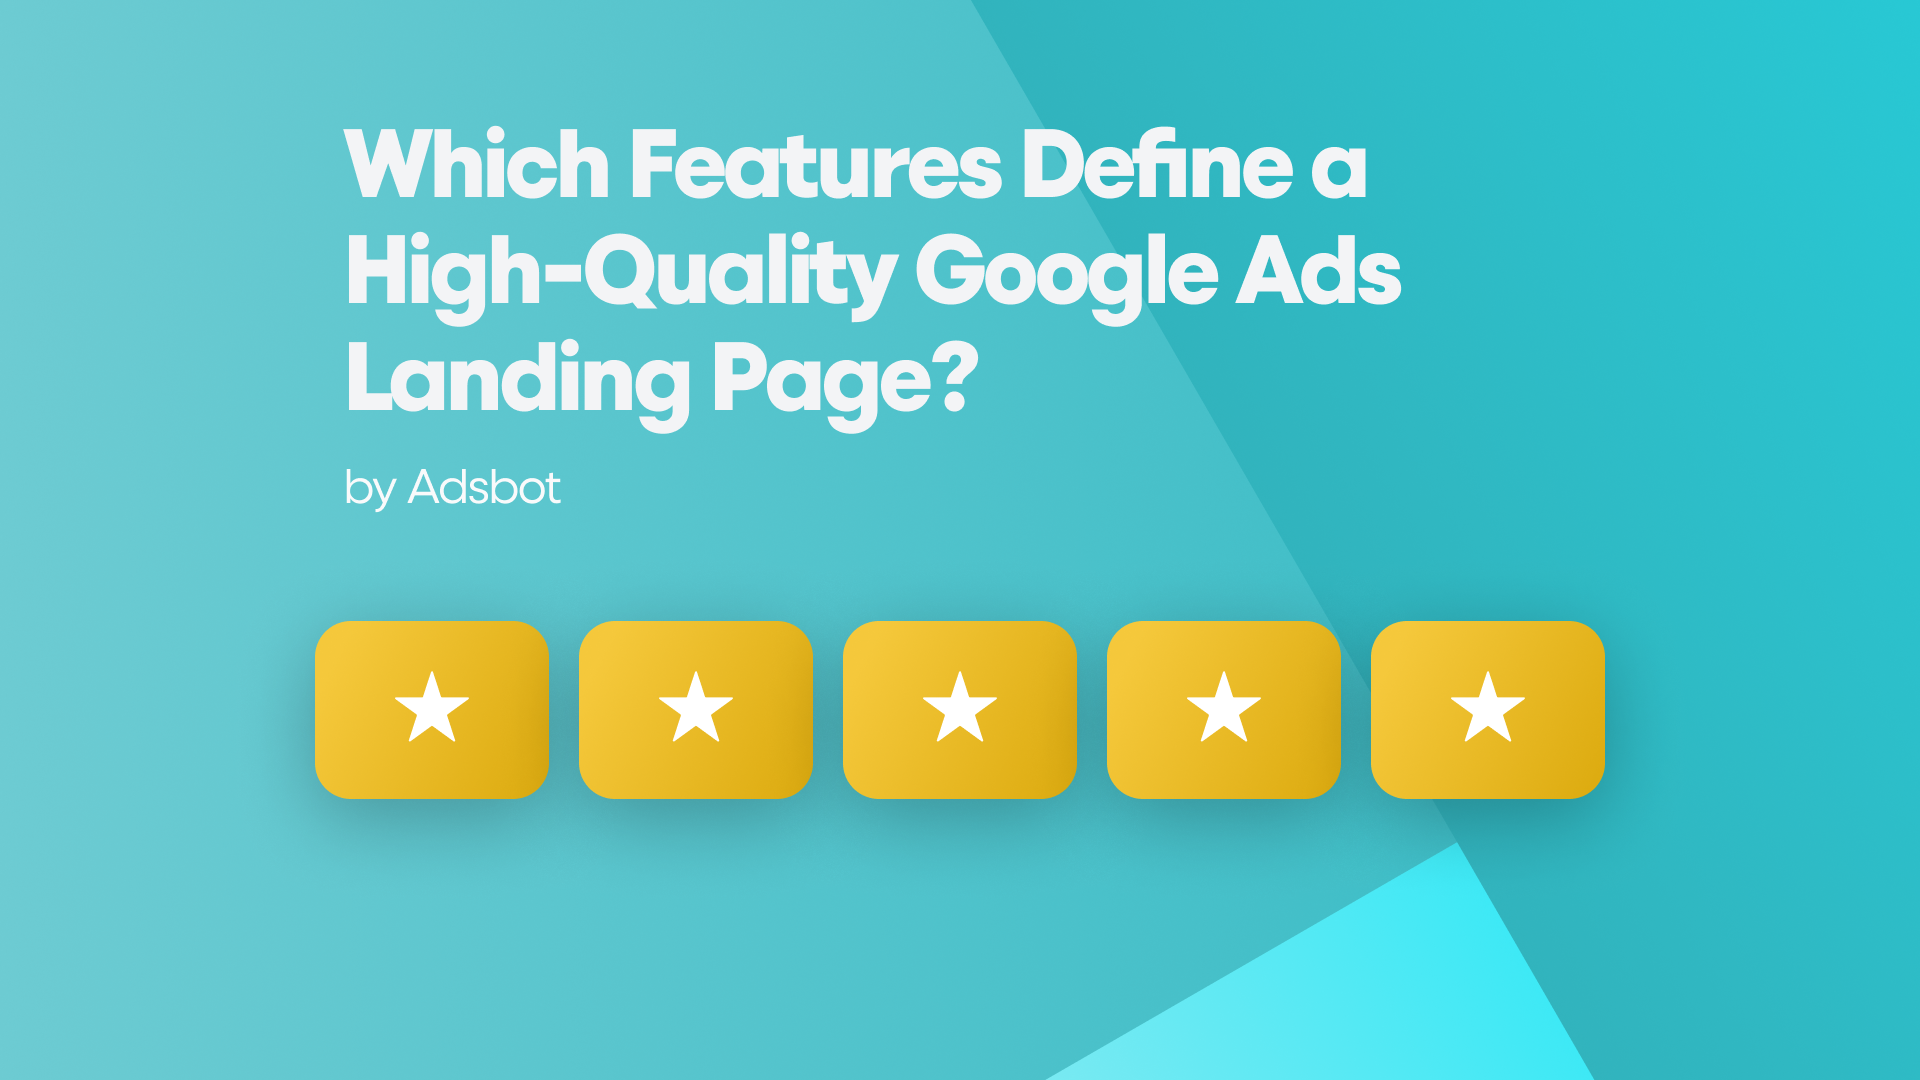 Which Features Define a High-Quality Google Ads Landing Page?